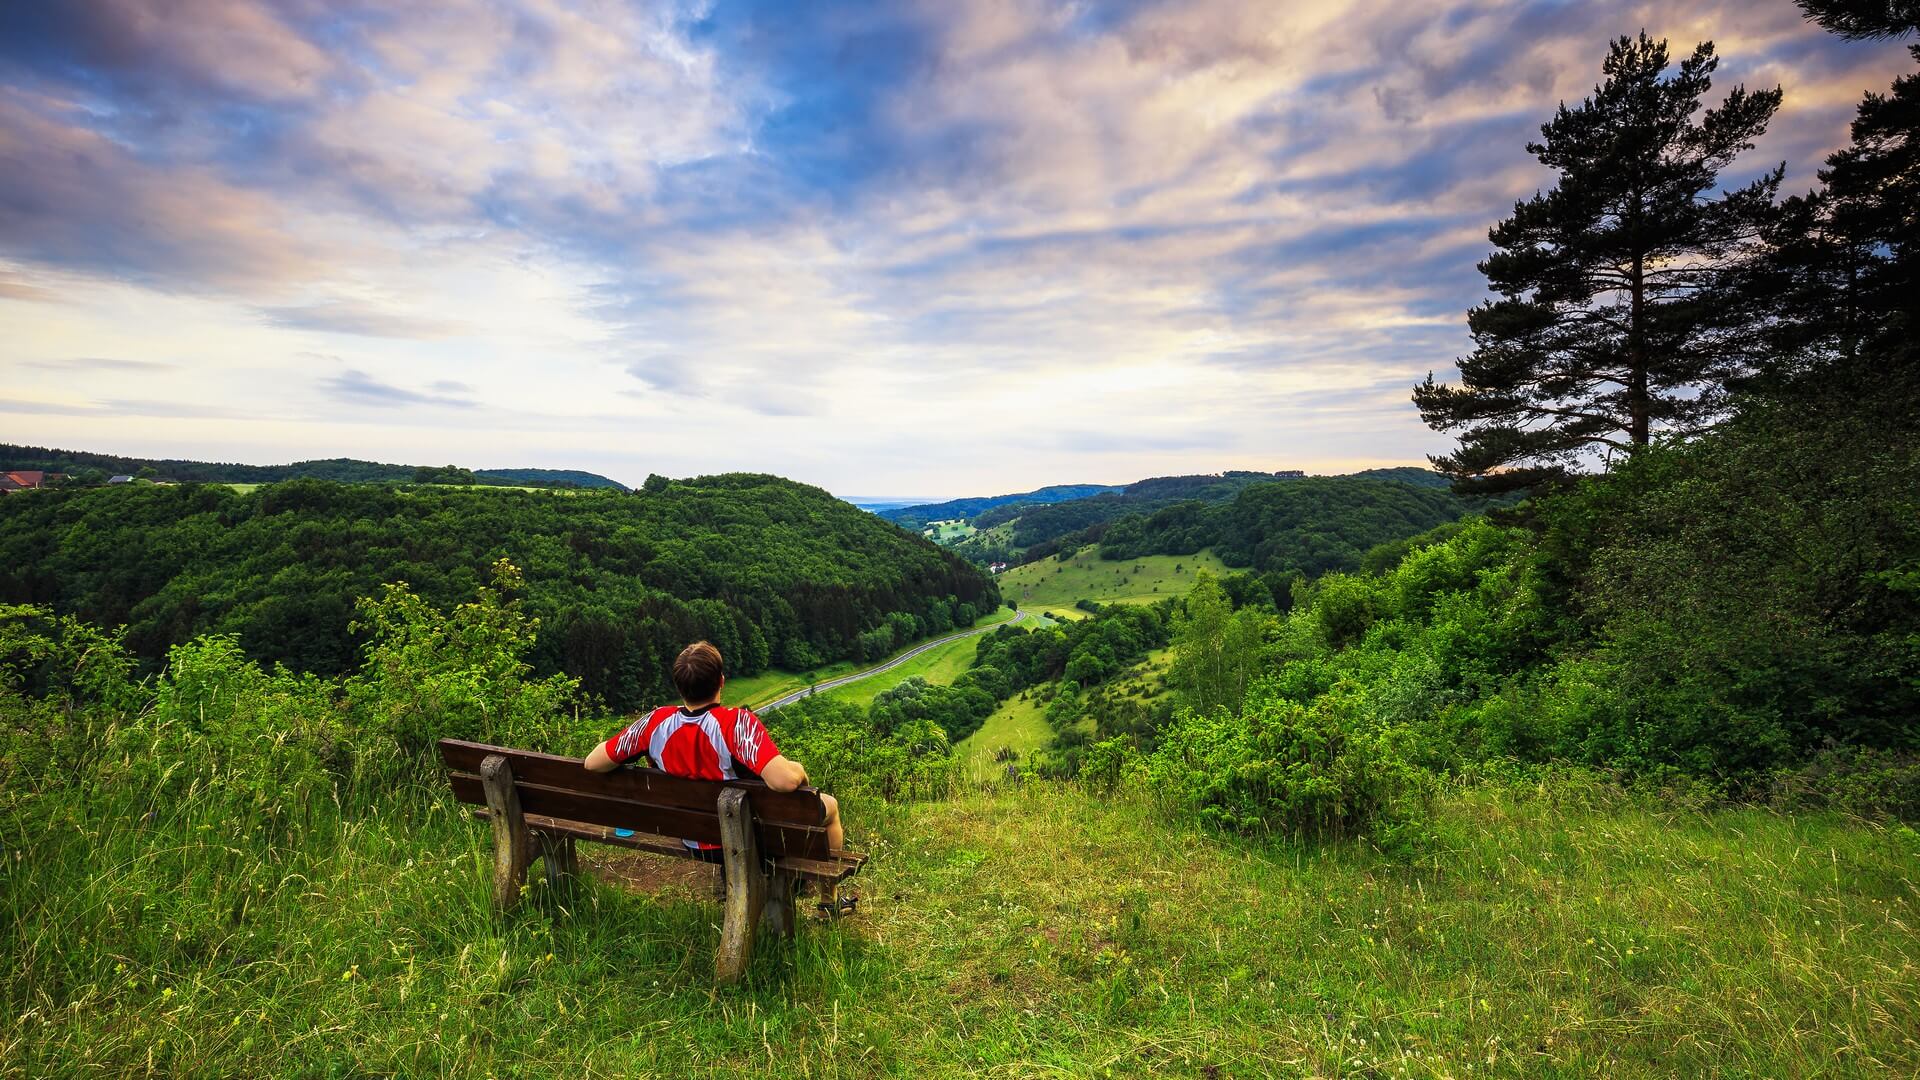 Young Man in red shirt on a bench, enjoying the stunning view on an early summer bavarian countryside hill landscape in Franconia, Germany
